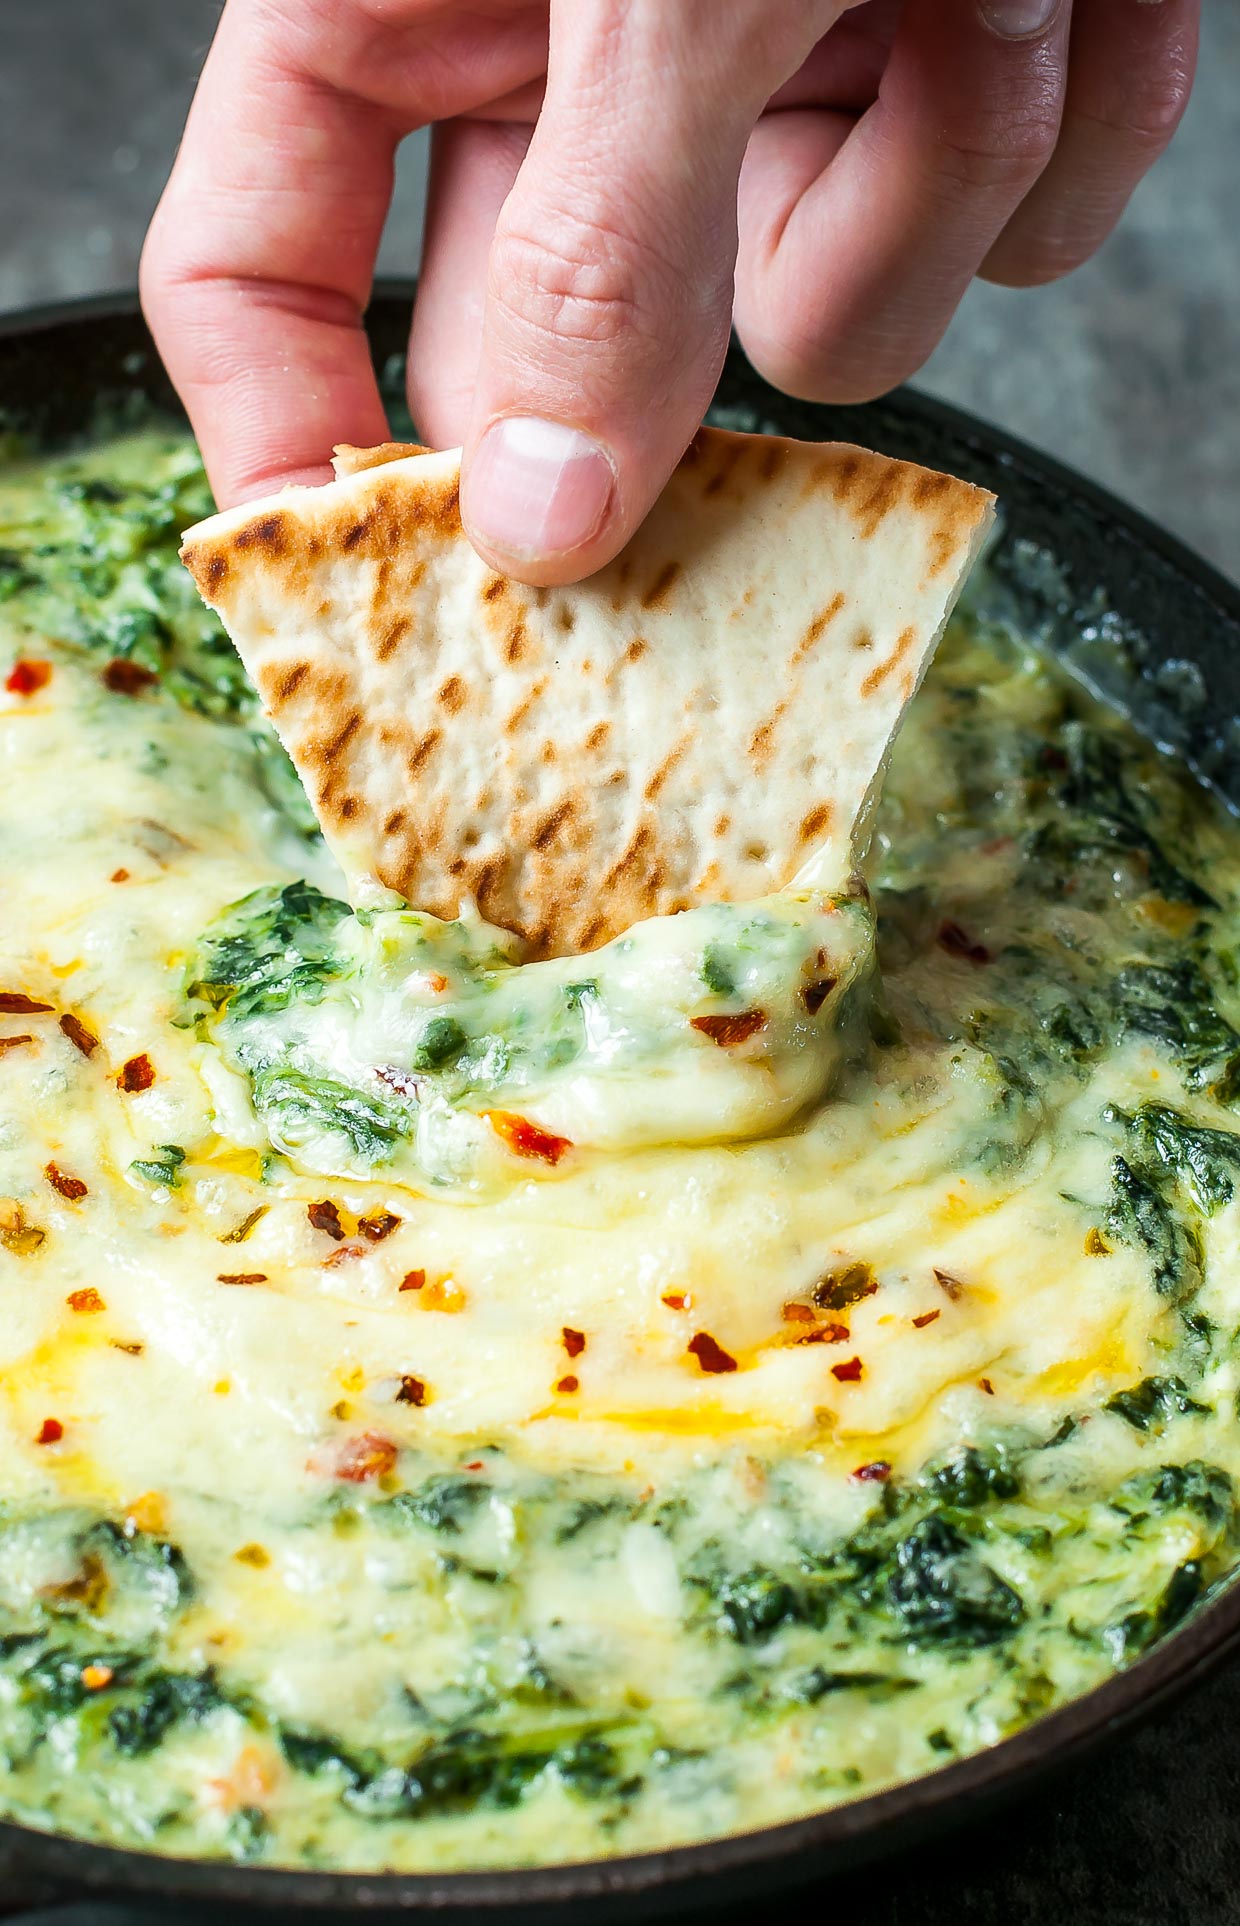 Serve this Cheesy Baked Shrimp and Spinach Dip at your next party and it's sure to be the first dish devoured! My friends and family BEG for this easy cheesy appetizer!